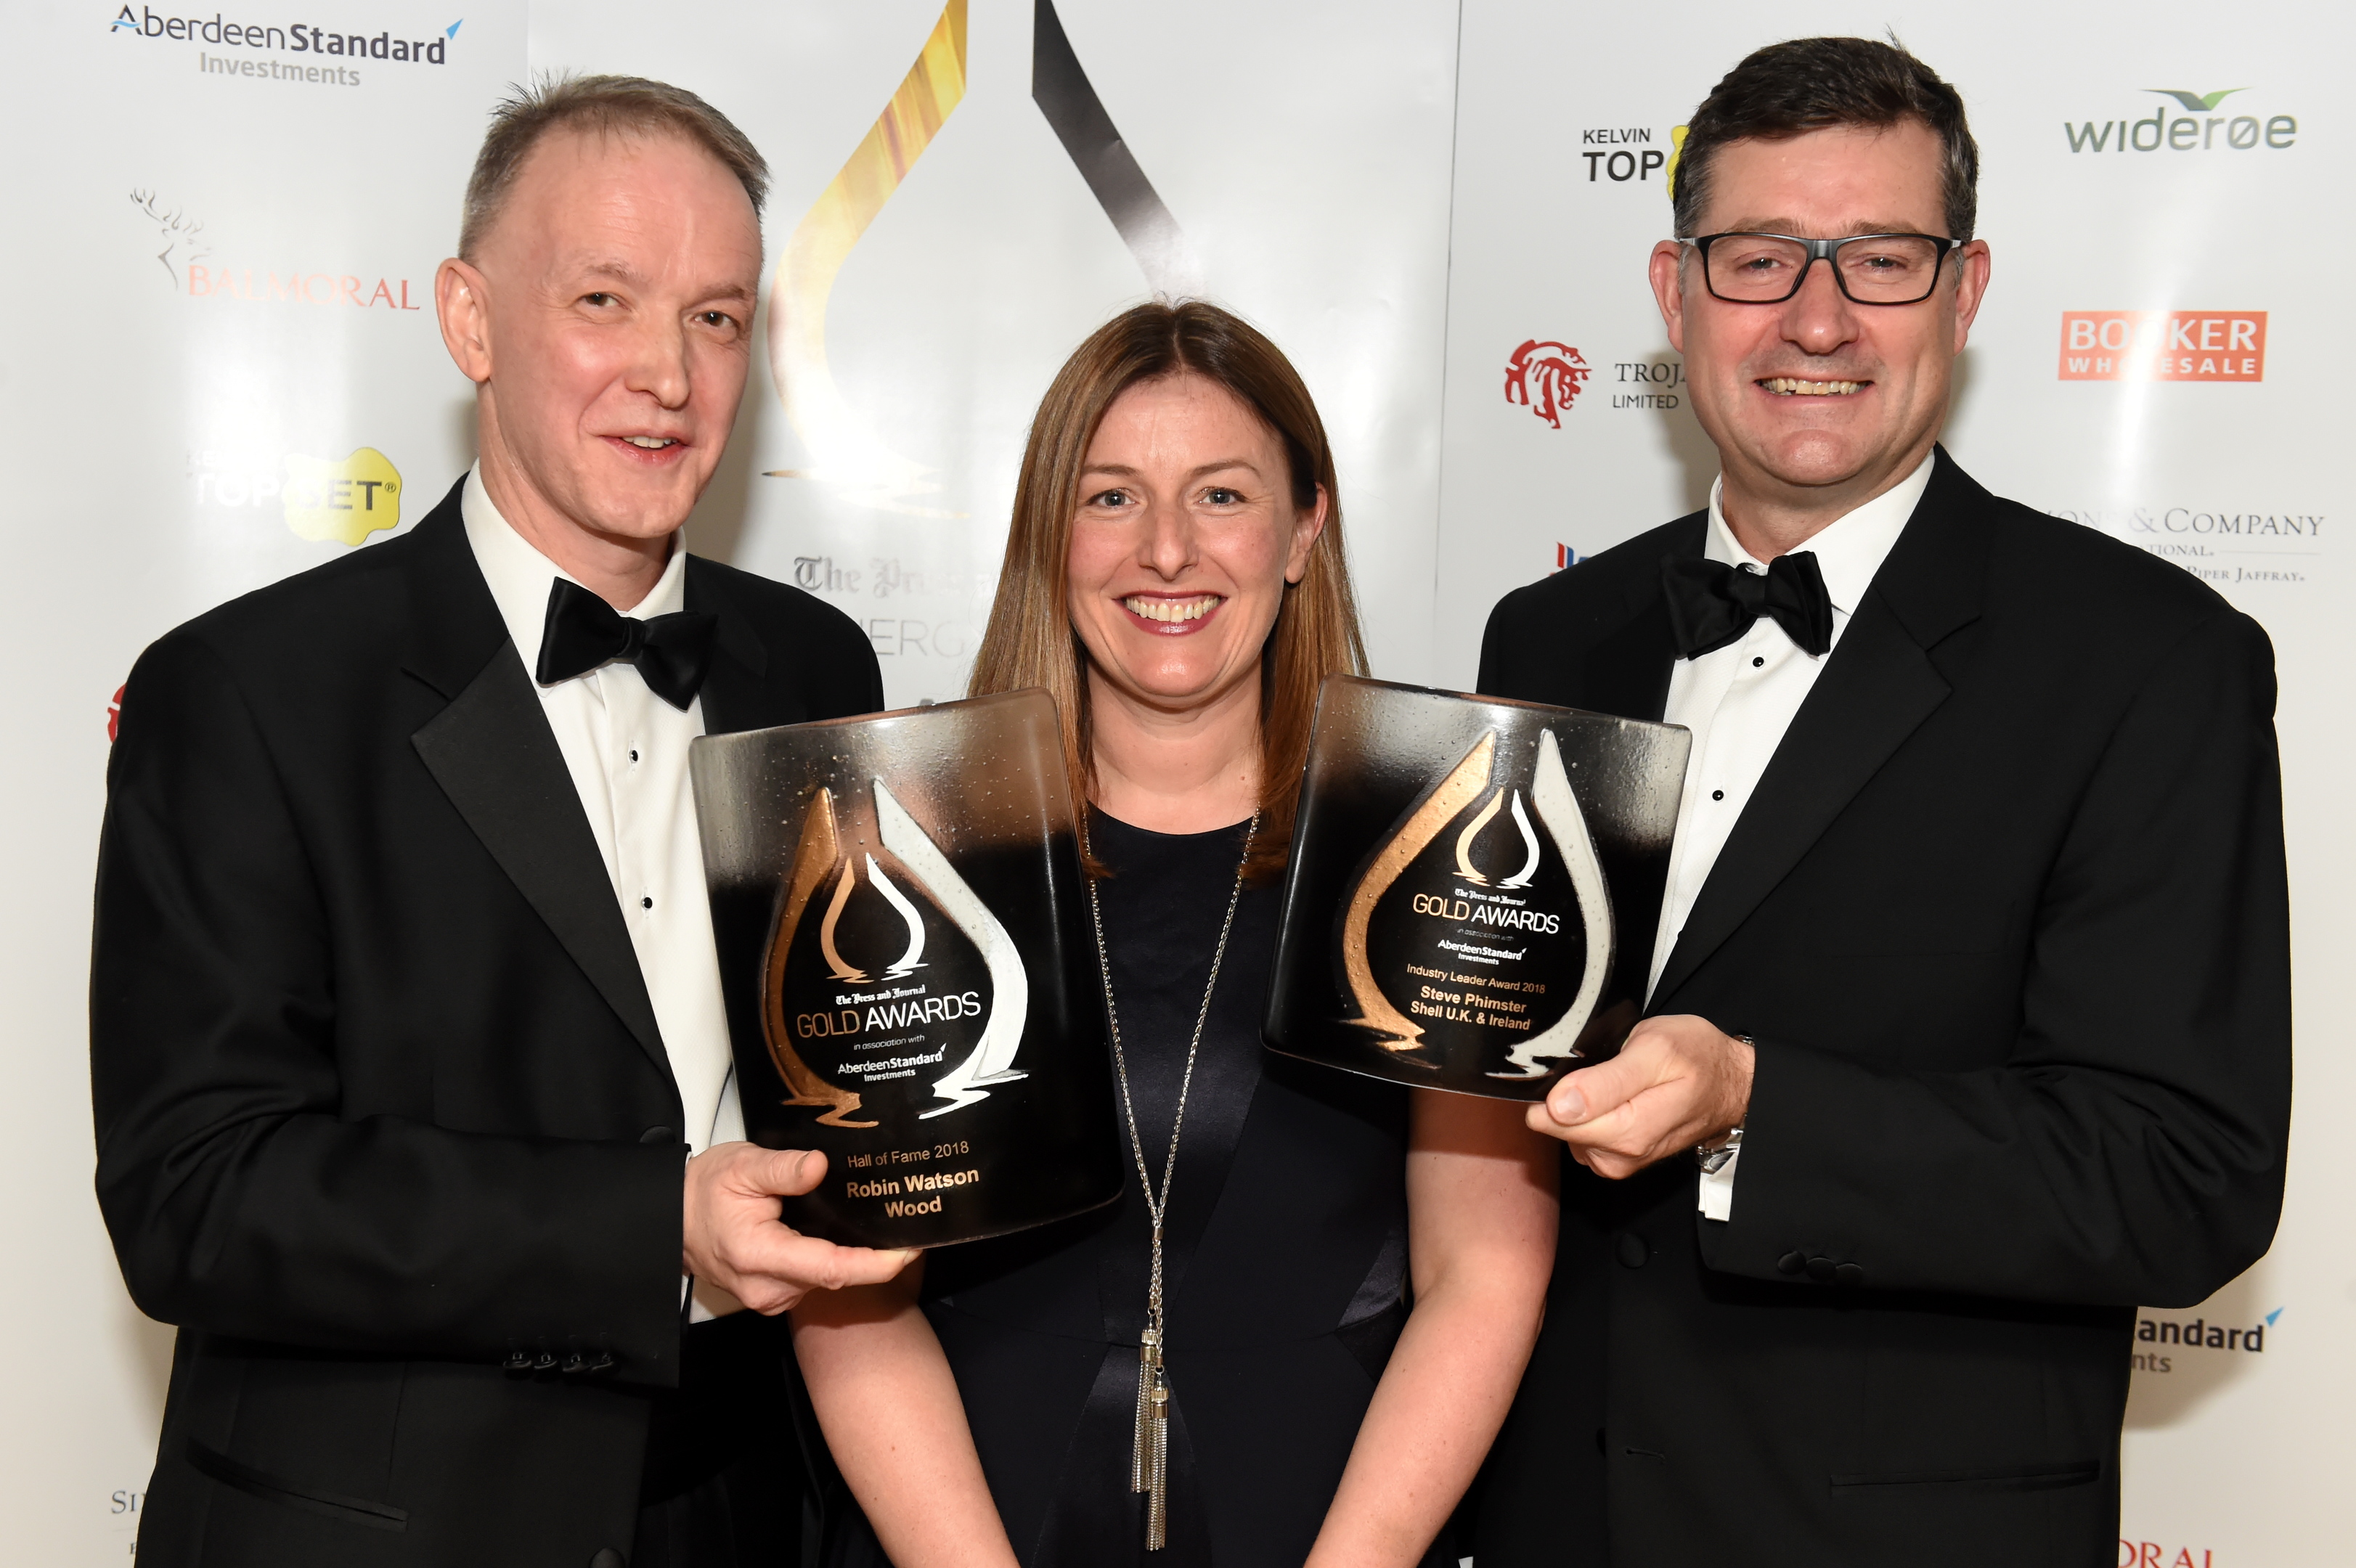 Press & Journal's Gold Awards 2018, at the Marcliffe Hotel.

Picture of (L-R) Hall of Fame winner and Wood CEO Robin Watson, Nicola Fraser from sponsor Aberdeen Standard Investments and Industry leader award winner Steve Phimister of Shell. 

Picture by KENNY ELRICK     07/09/2018